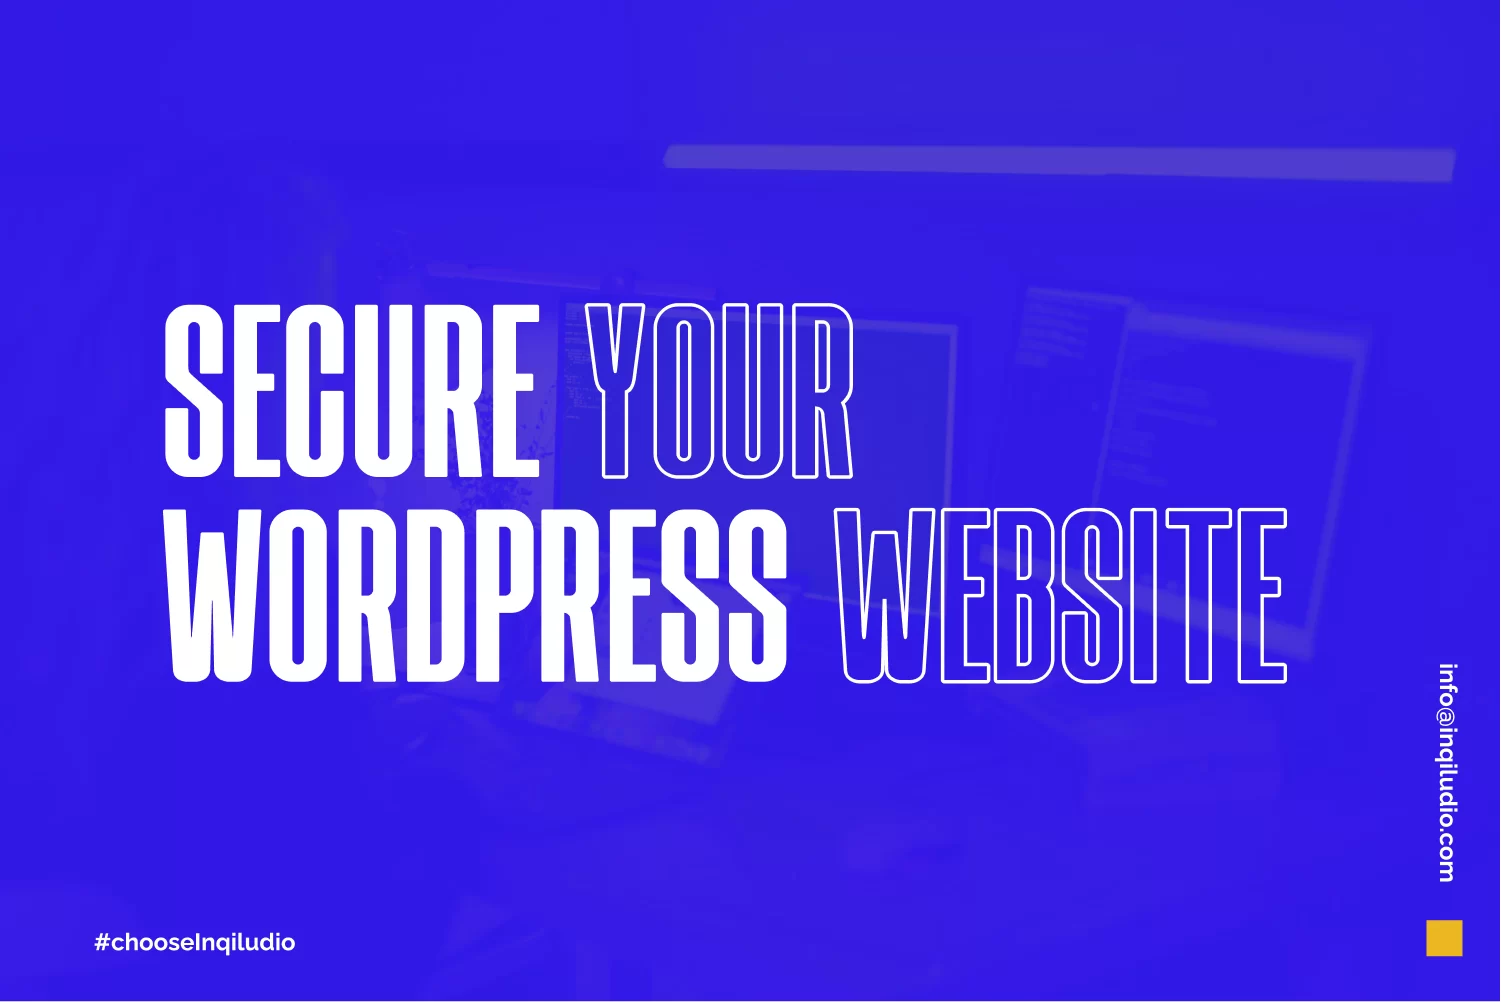 Is Your WordPress Website Secure? Let’s check it out!